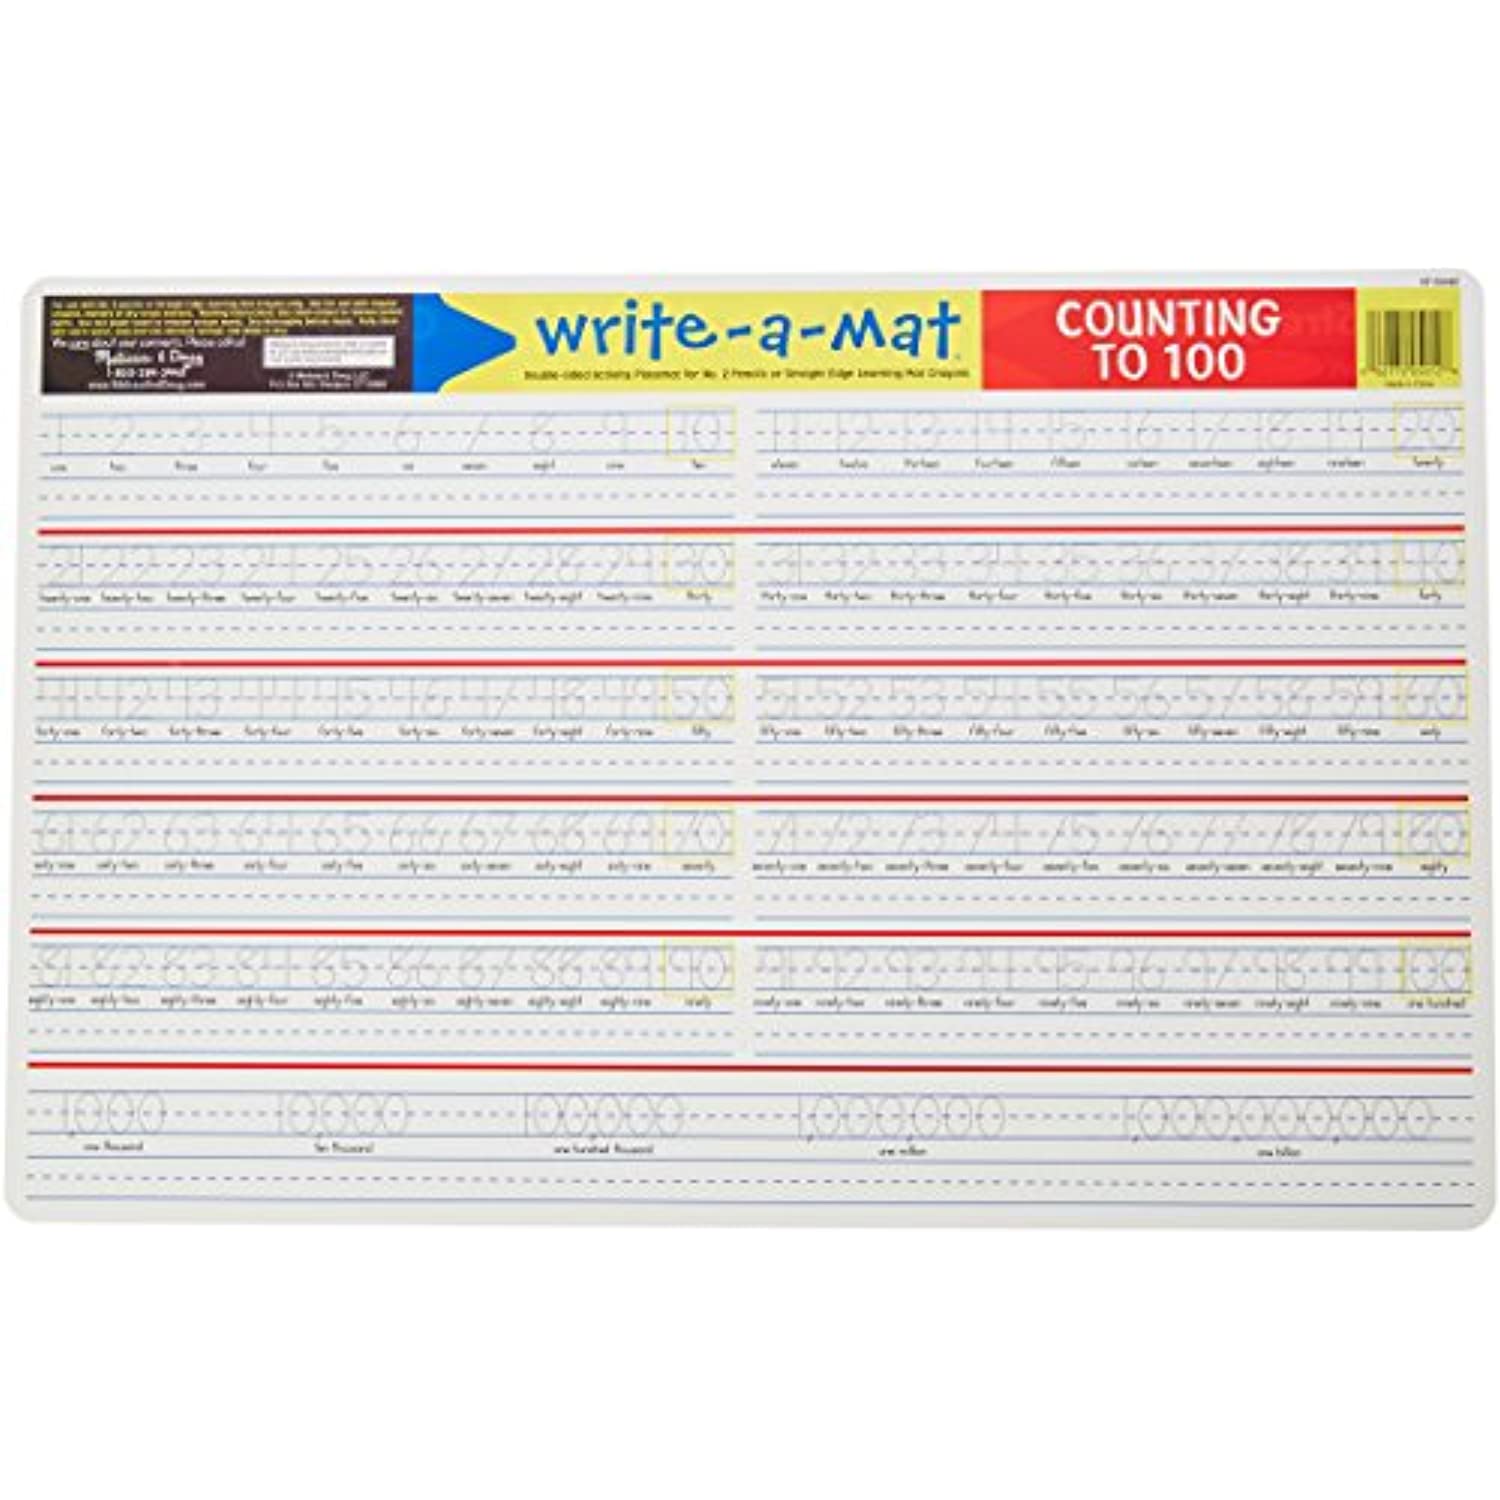 Letters & Words Write-a-Mat w/ Crayon Bundle for Ages 4 to 5+: Alphabets, Phonics & Handwriting - The Straight Edge Series